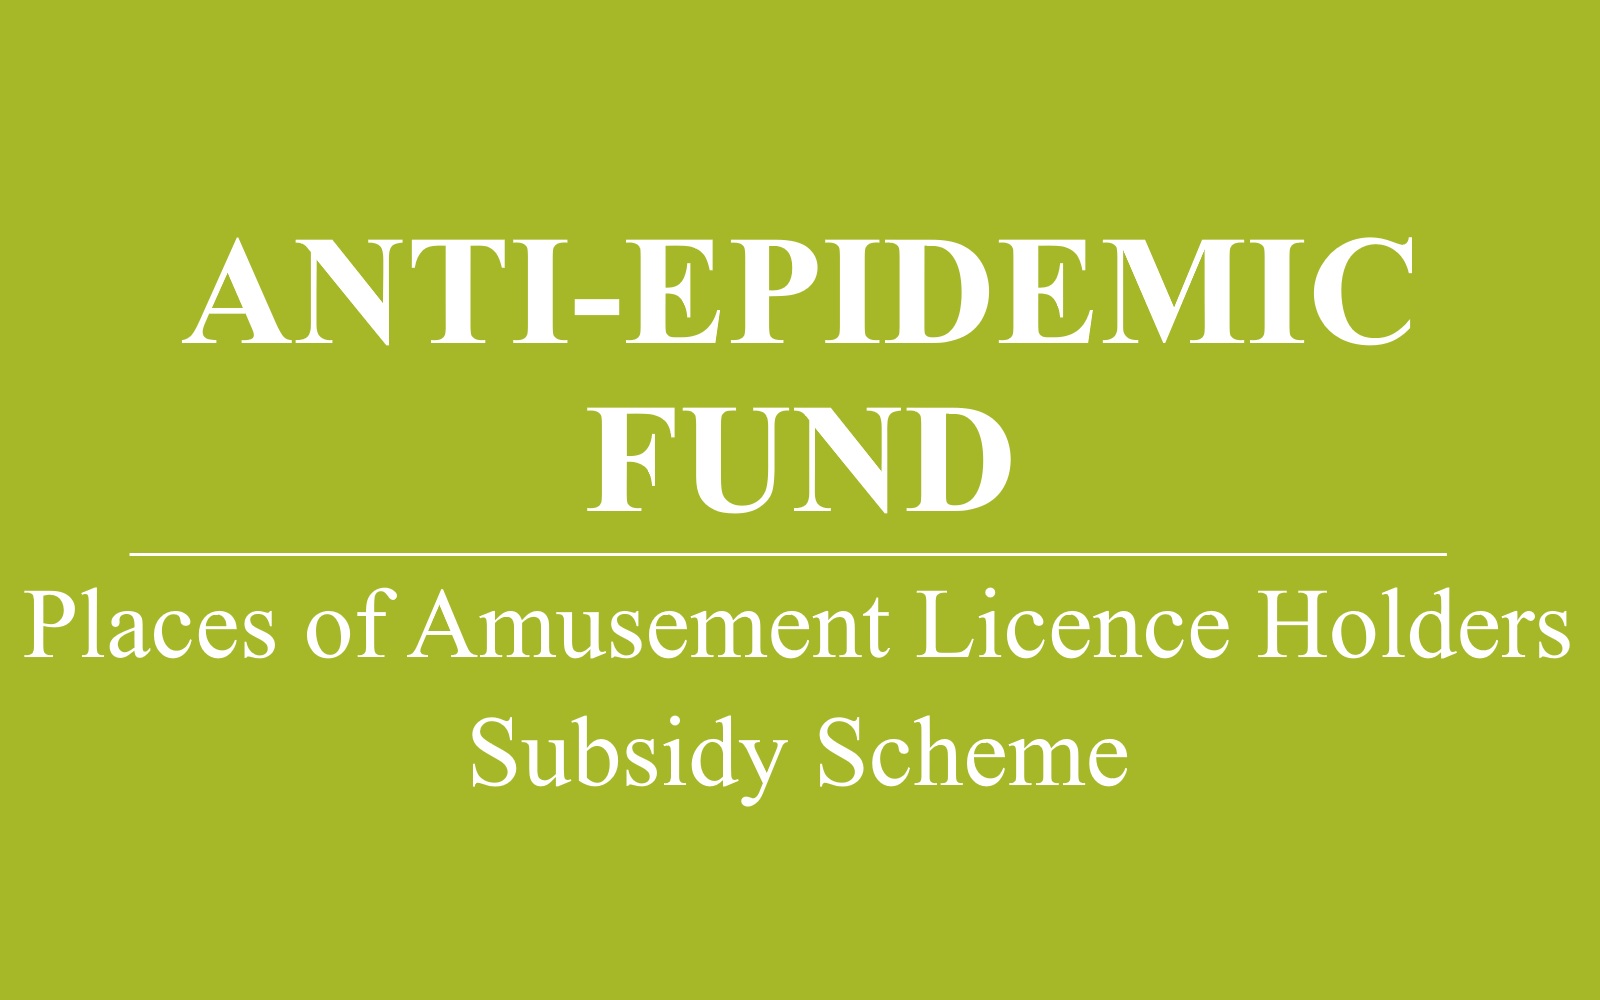 Places of Amusement Licence Holders Subsidy Scheme under fifth-round of Anti-epidemic Fund